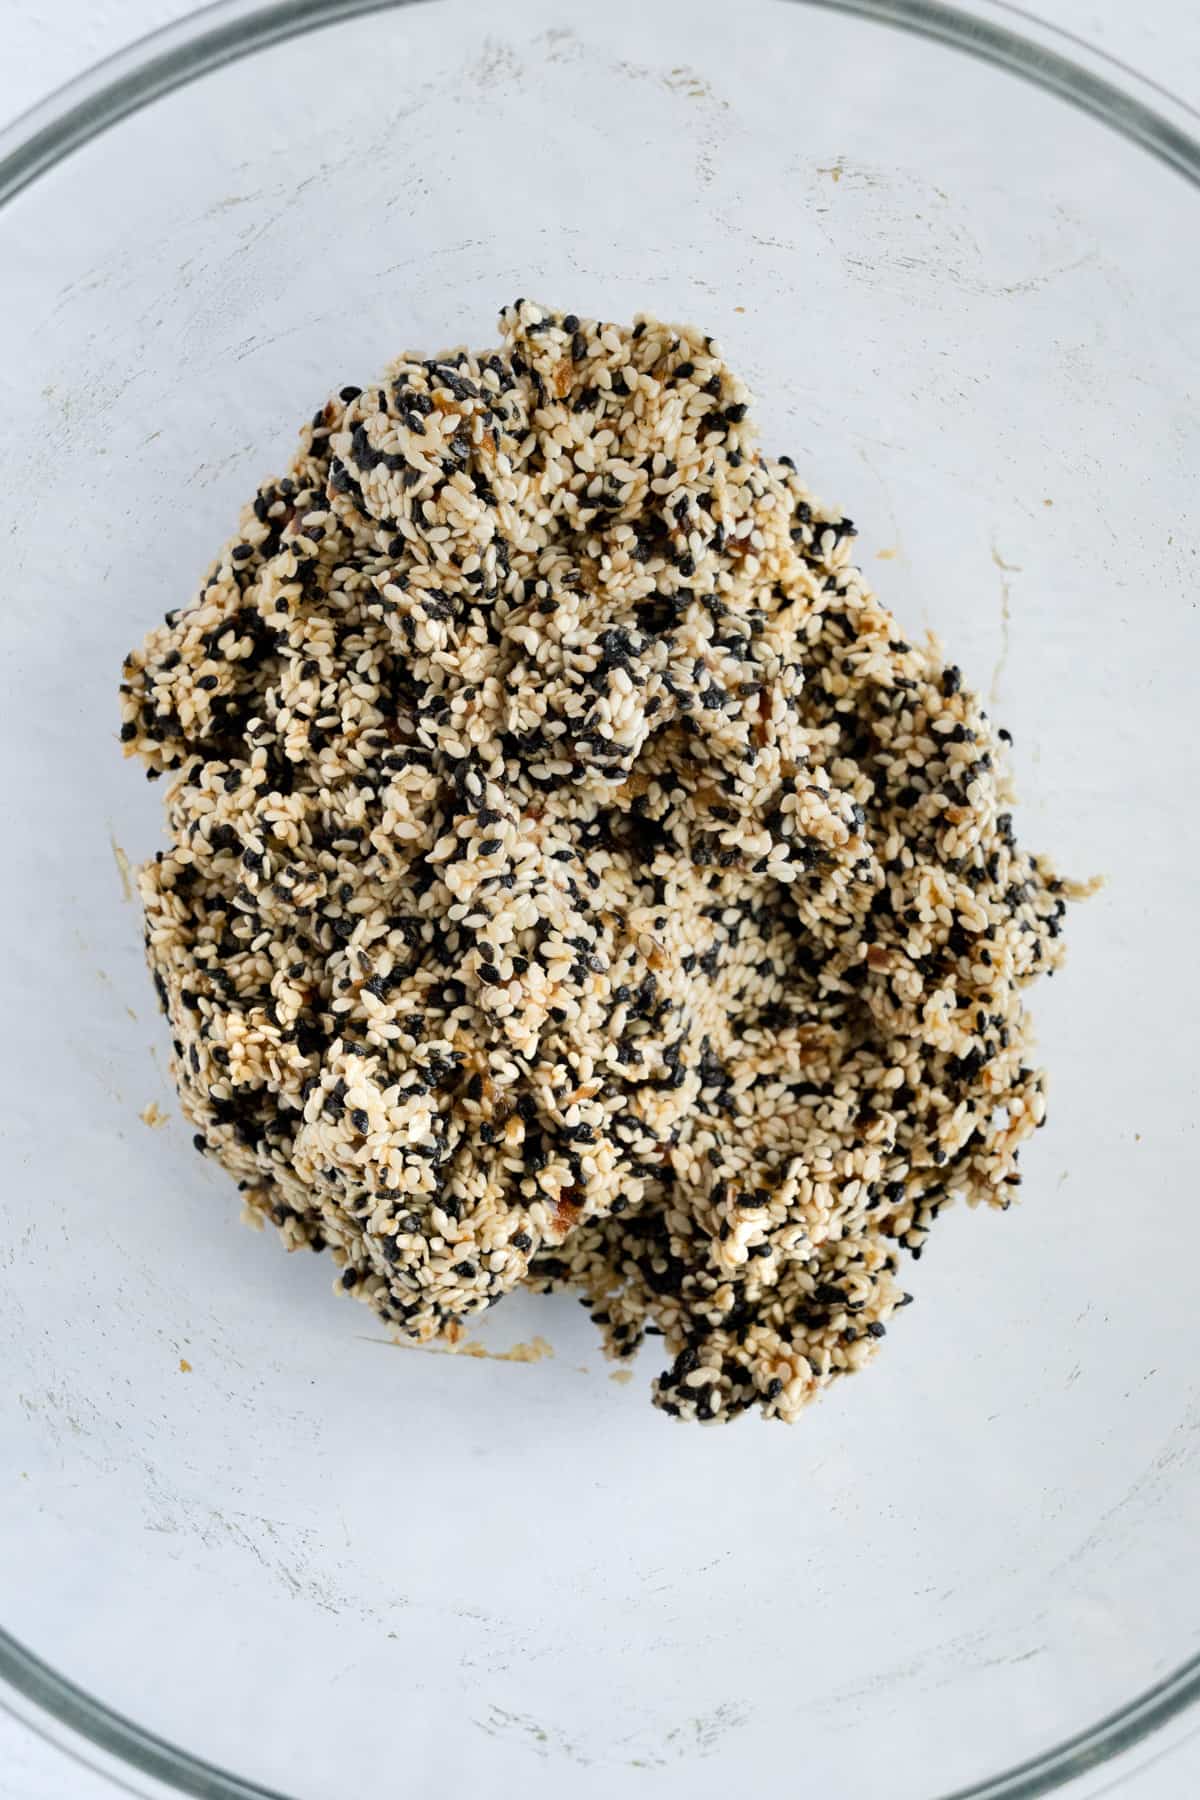 white and black sesame blended together in a glass bowl